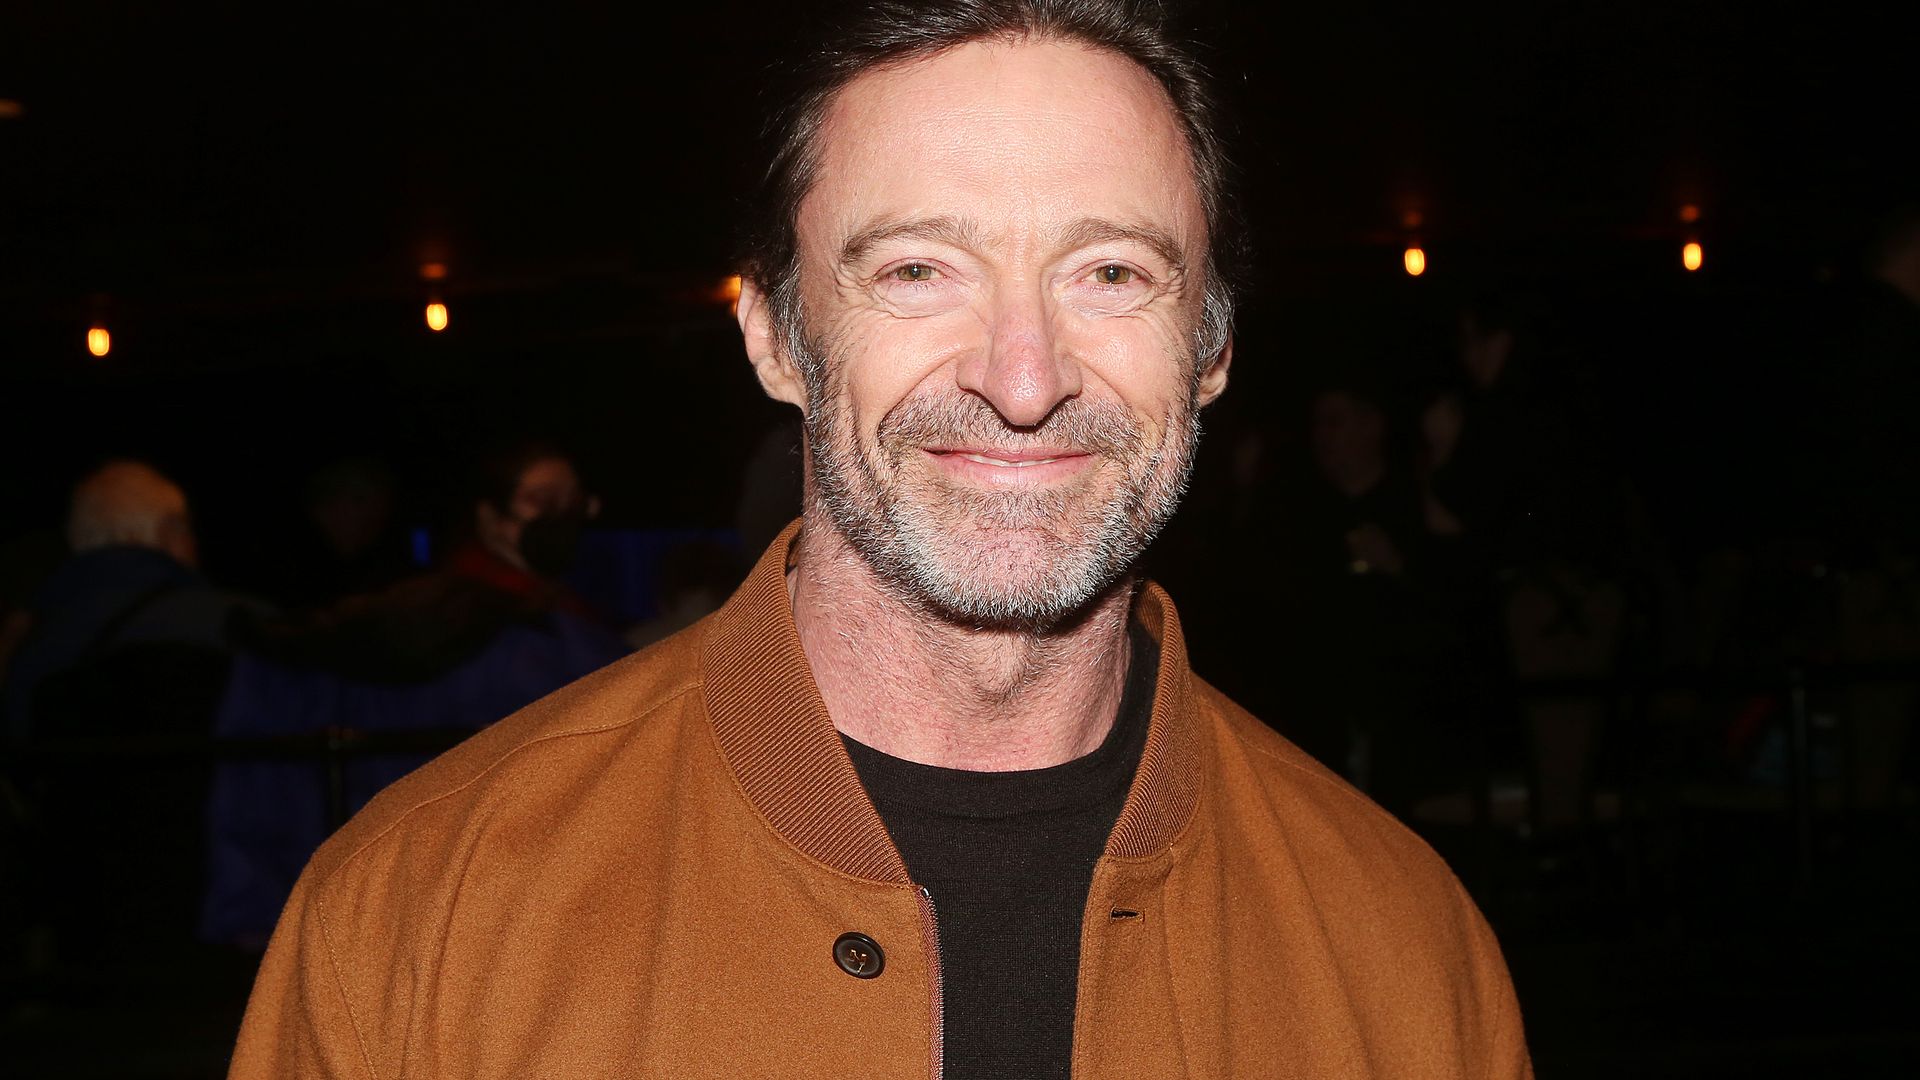 NEW YORK, NEW YORK - MARCH 25:(EXCLUSIVE COVERAGE) Hugh Jackman poses at the closing performance of "Alan Cumming is NOT Acting his Age!" on Broadway at Studio 54 on March 25, 2024 in New York City. (Photo by Bruce Glikas/WireImage)